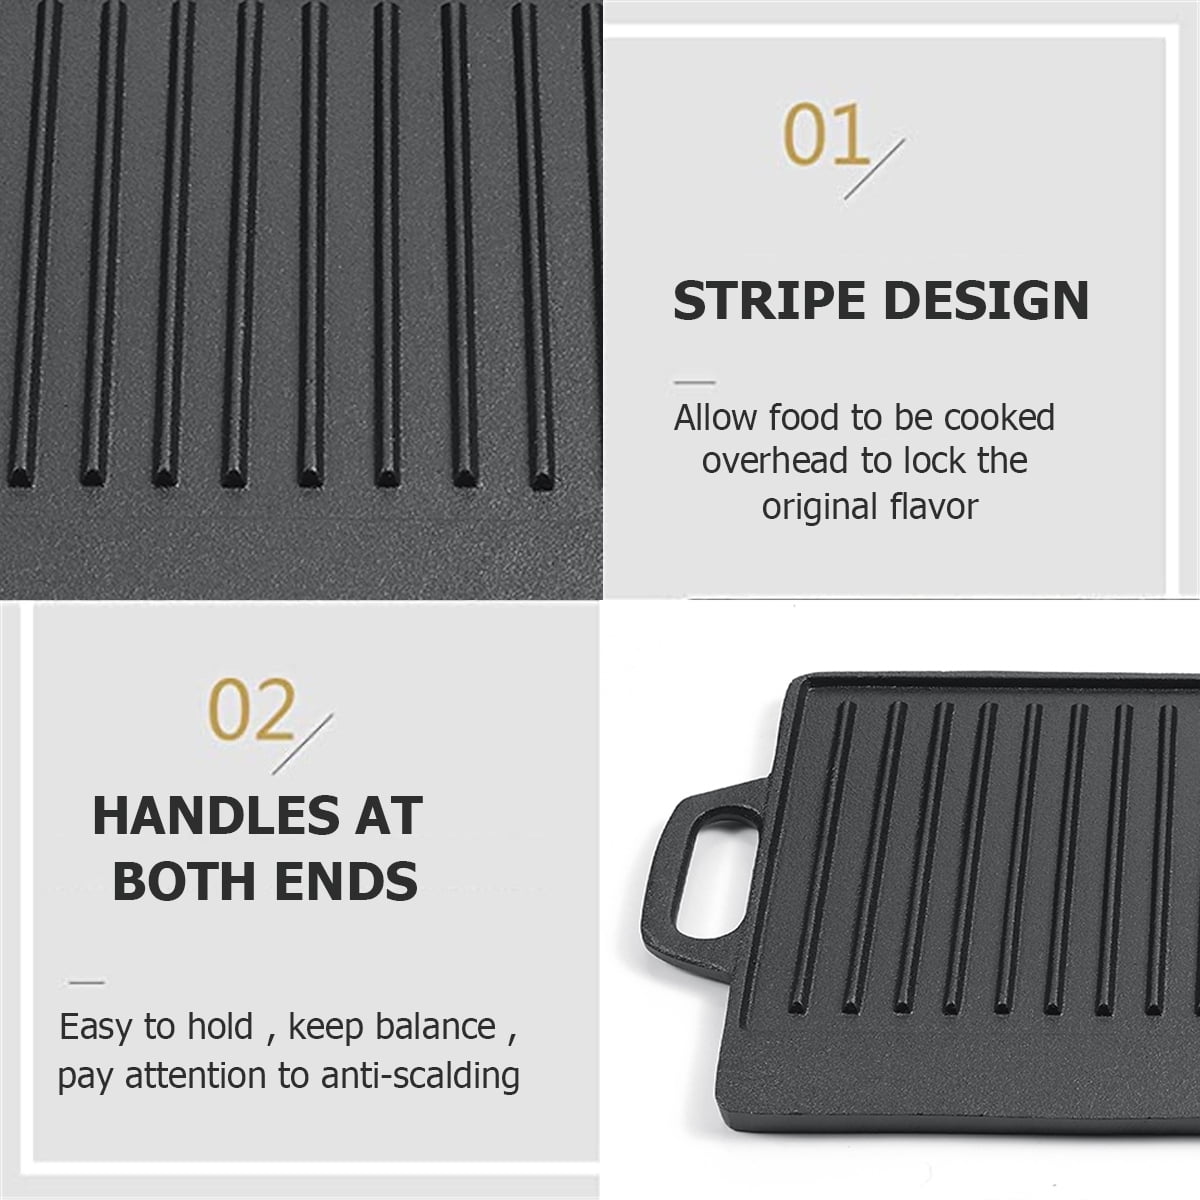 Lodge reversible Grill/Griddle $15 clearance at Walmart : r/castiron